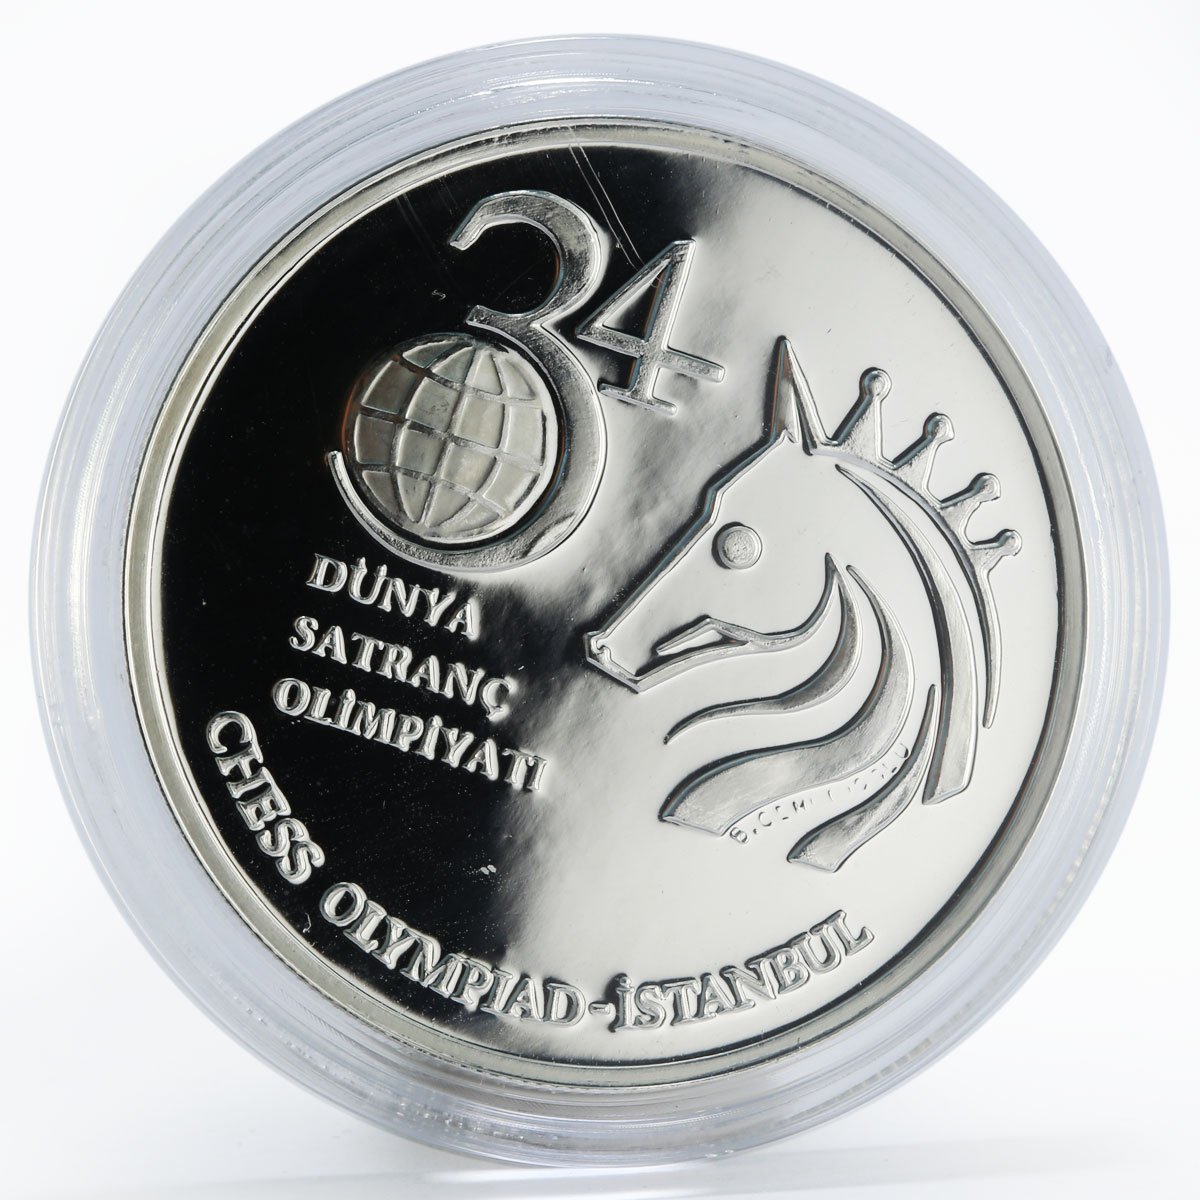 Turkey 7500000 lira 34th Chess Olympiad Istanbul proof silver coin 2000